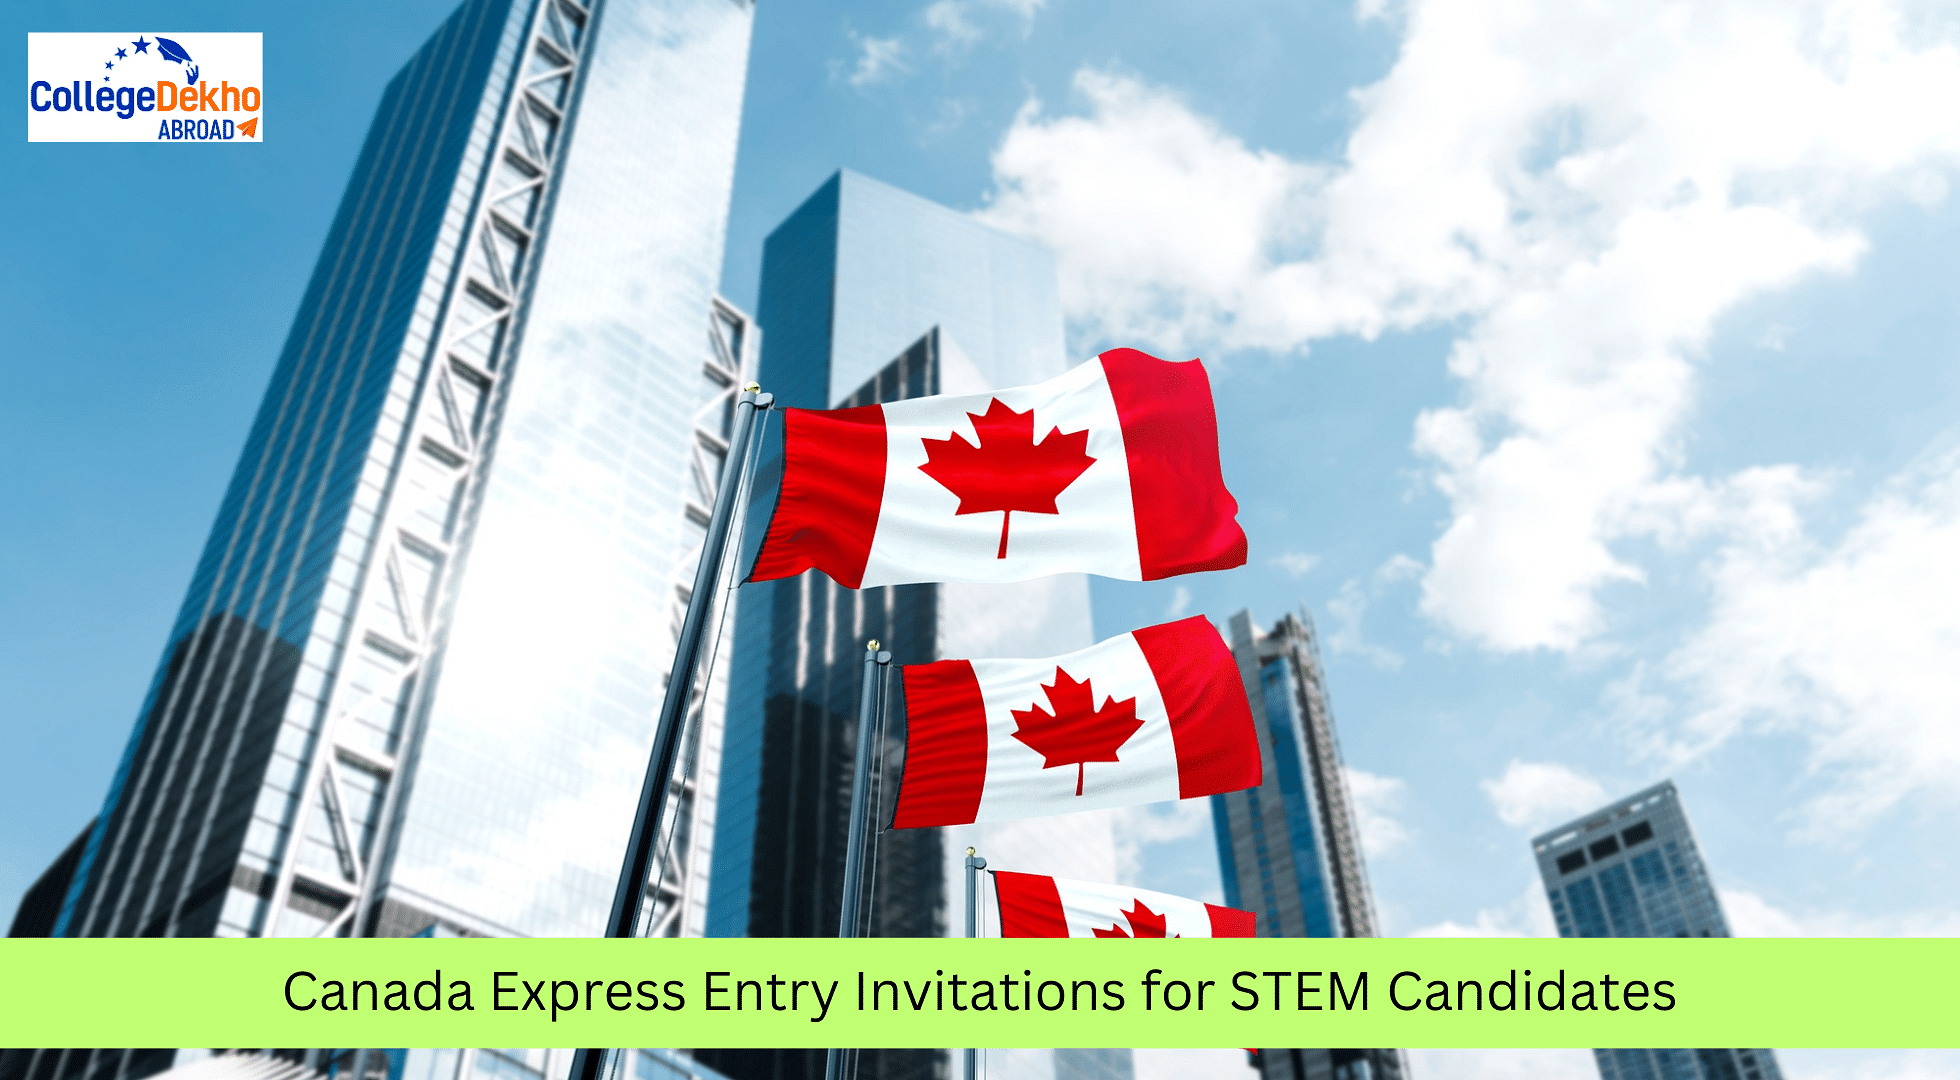 Canada Express Entry Invitations for STEM Candidates